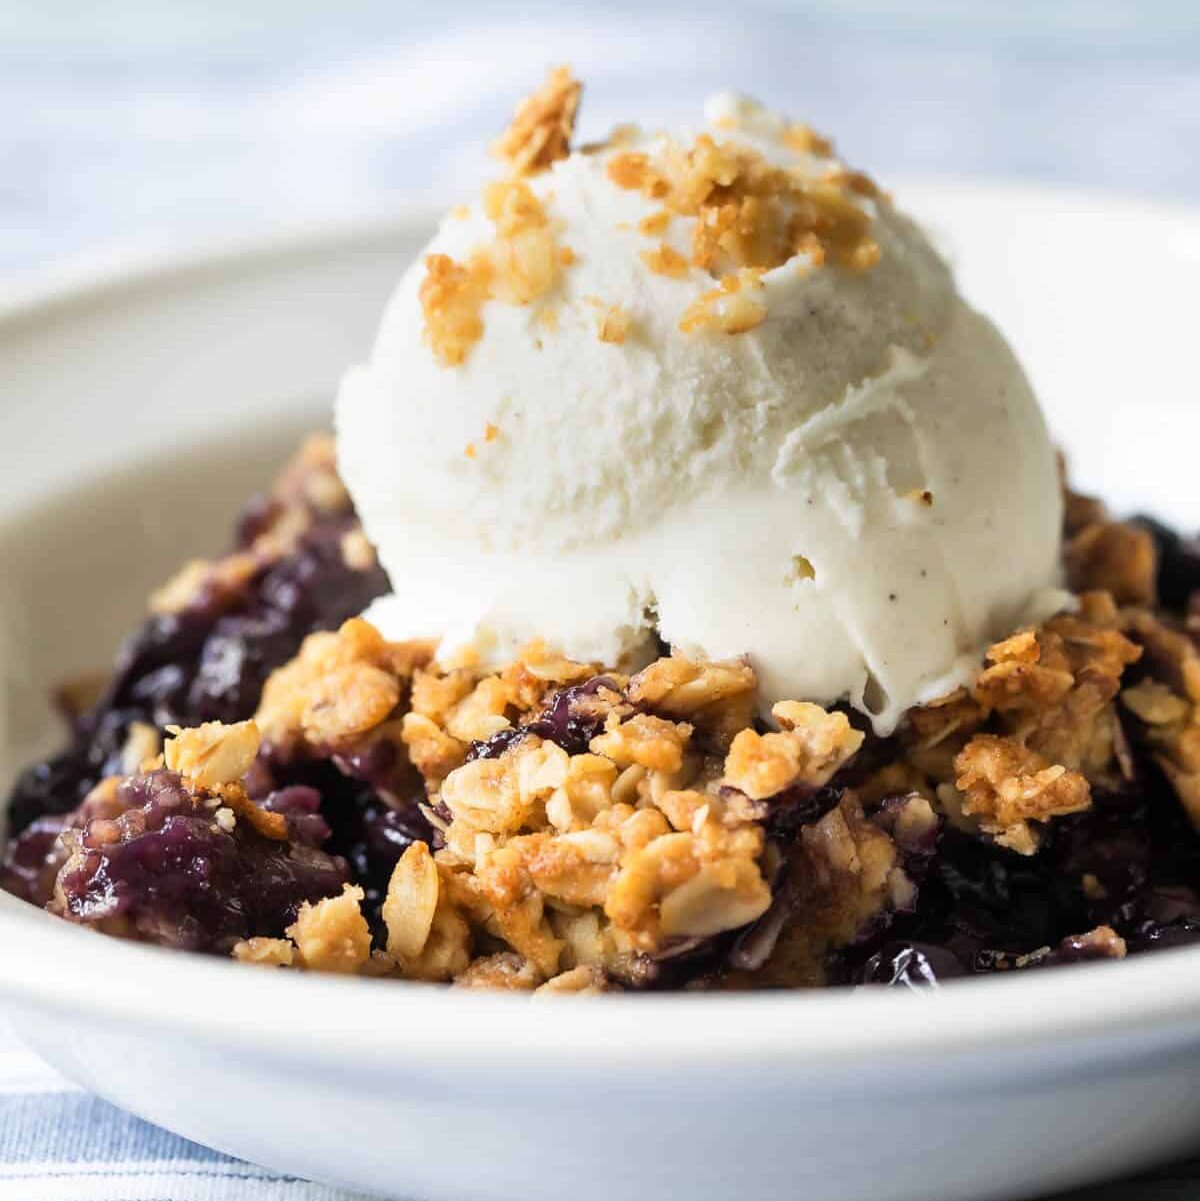 A bowl of blueberry crisp with a scoop of ice cream on top.